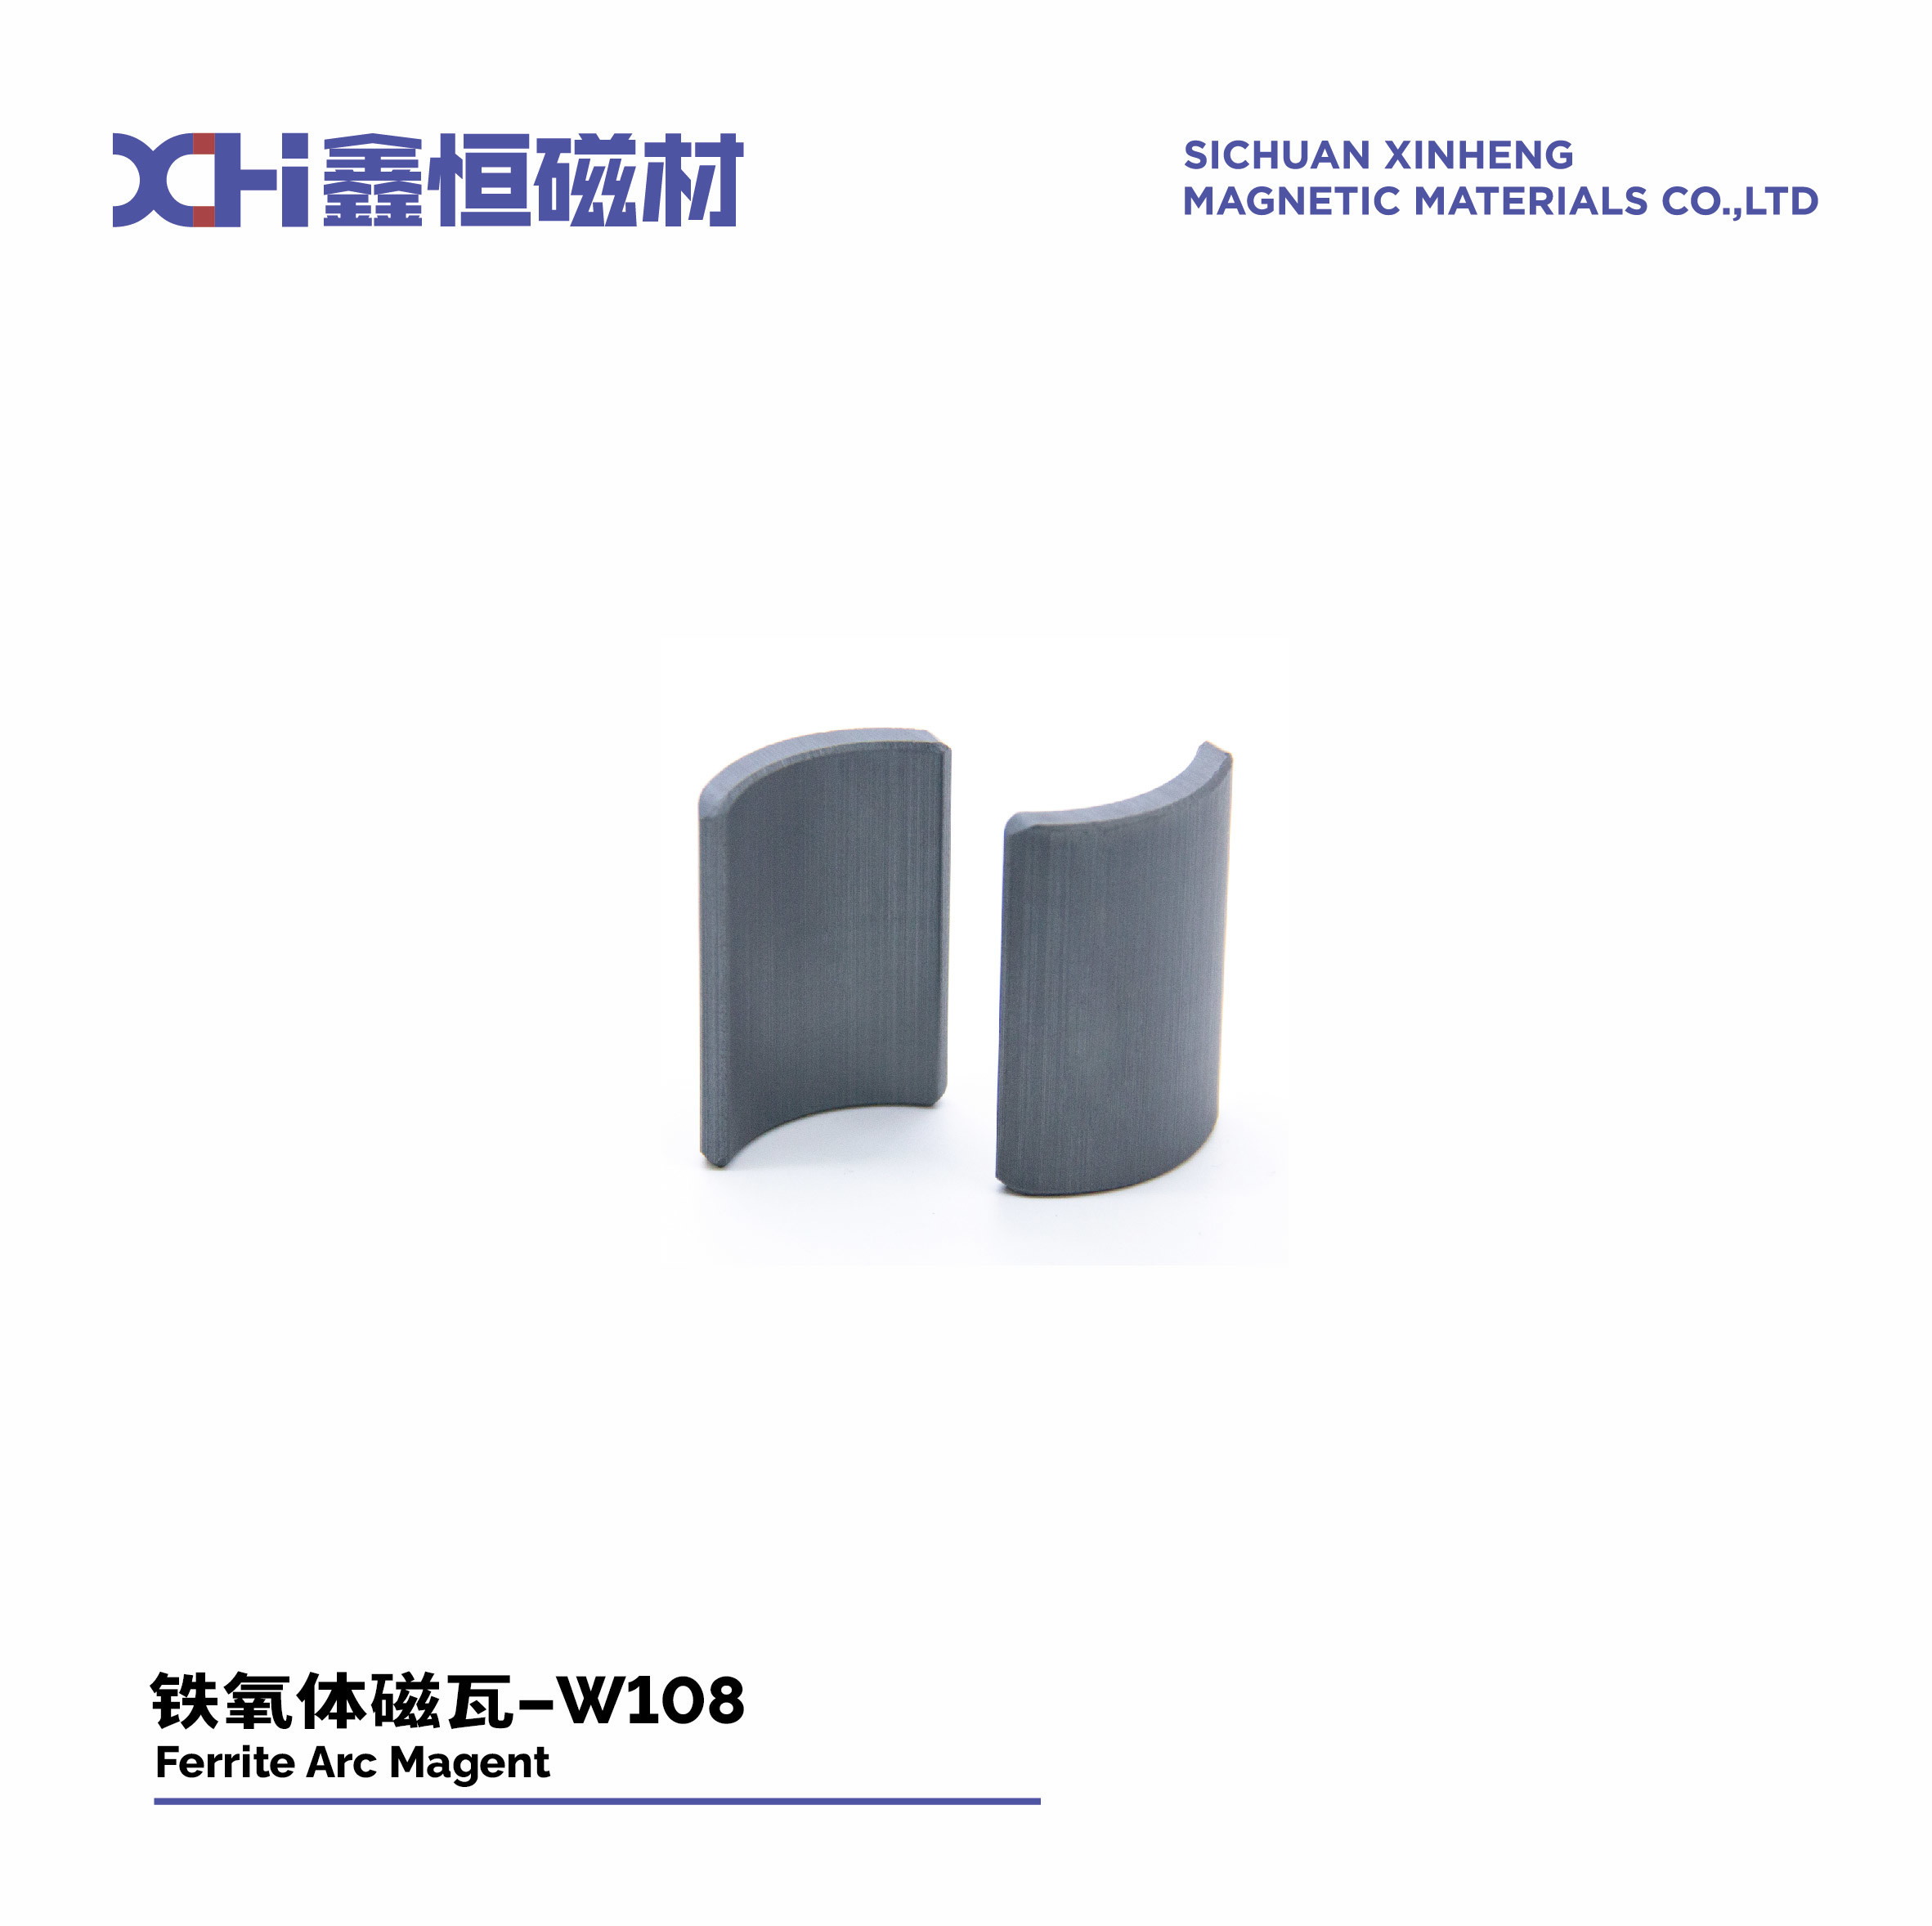 By Fine Grinding Of Permanent Magnet Ferrite For Automobile Window Motors W108